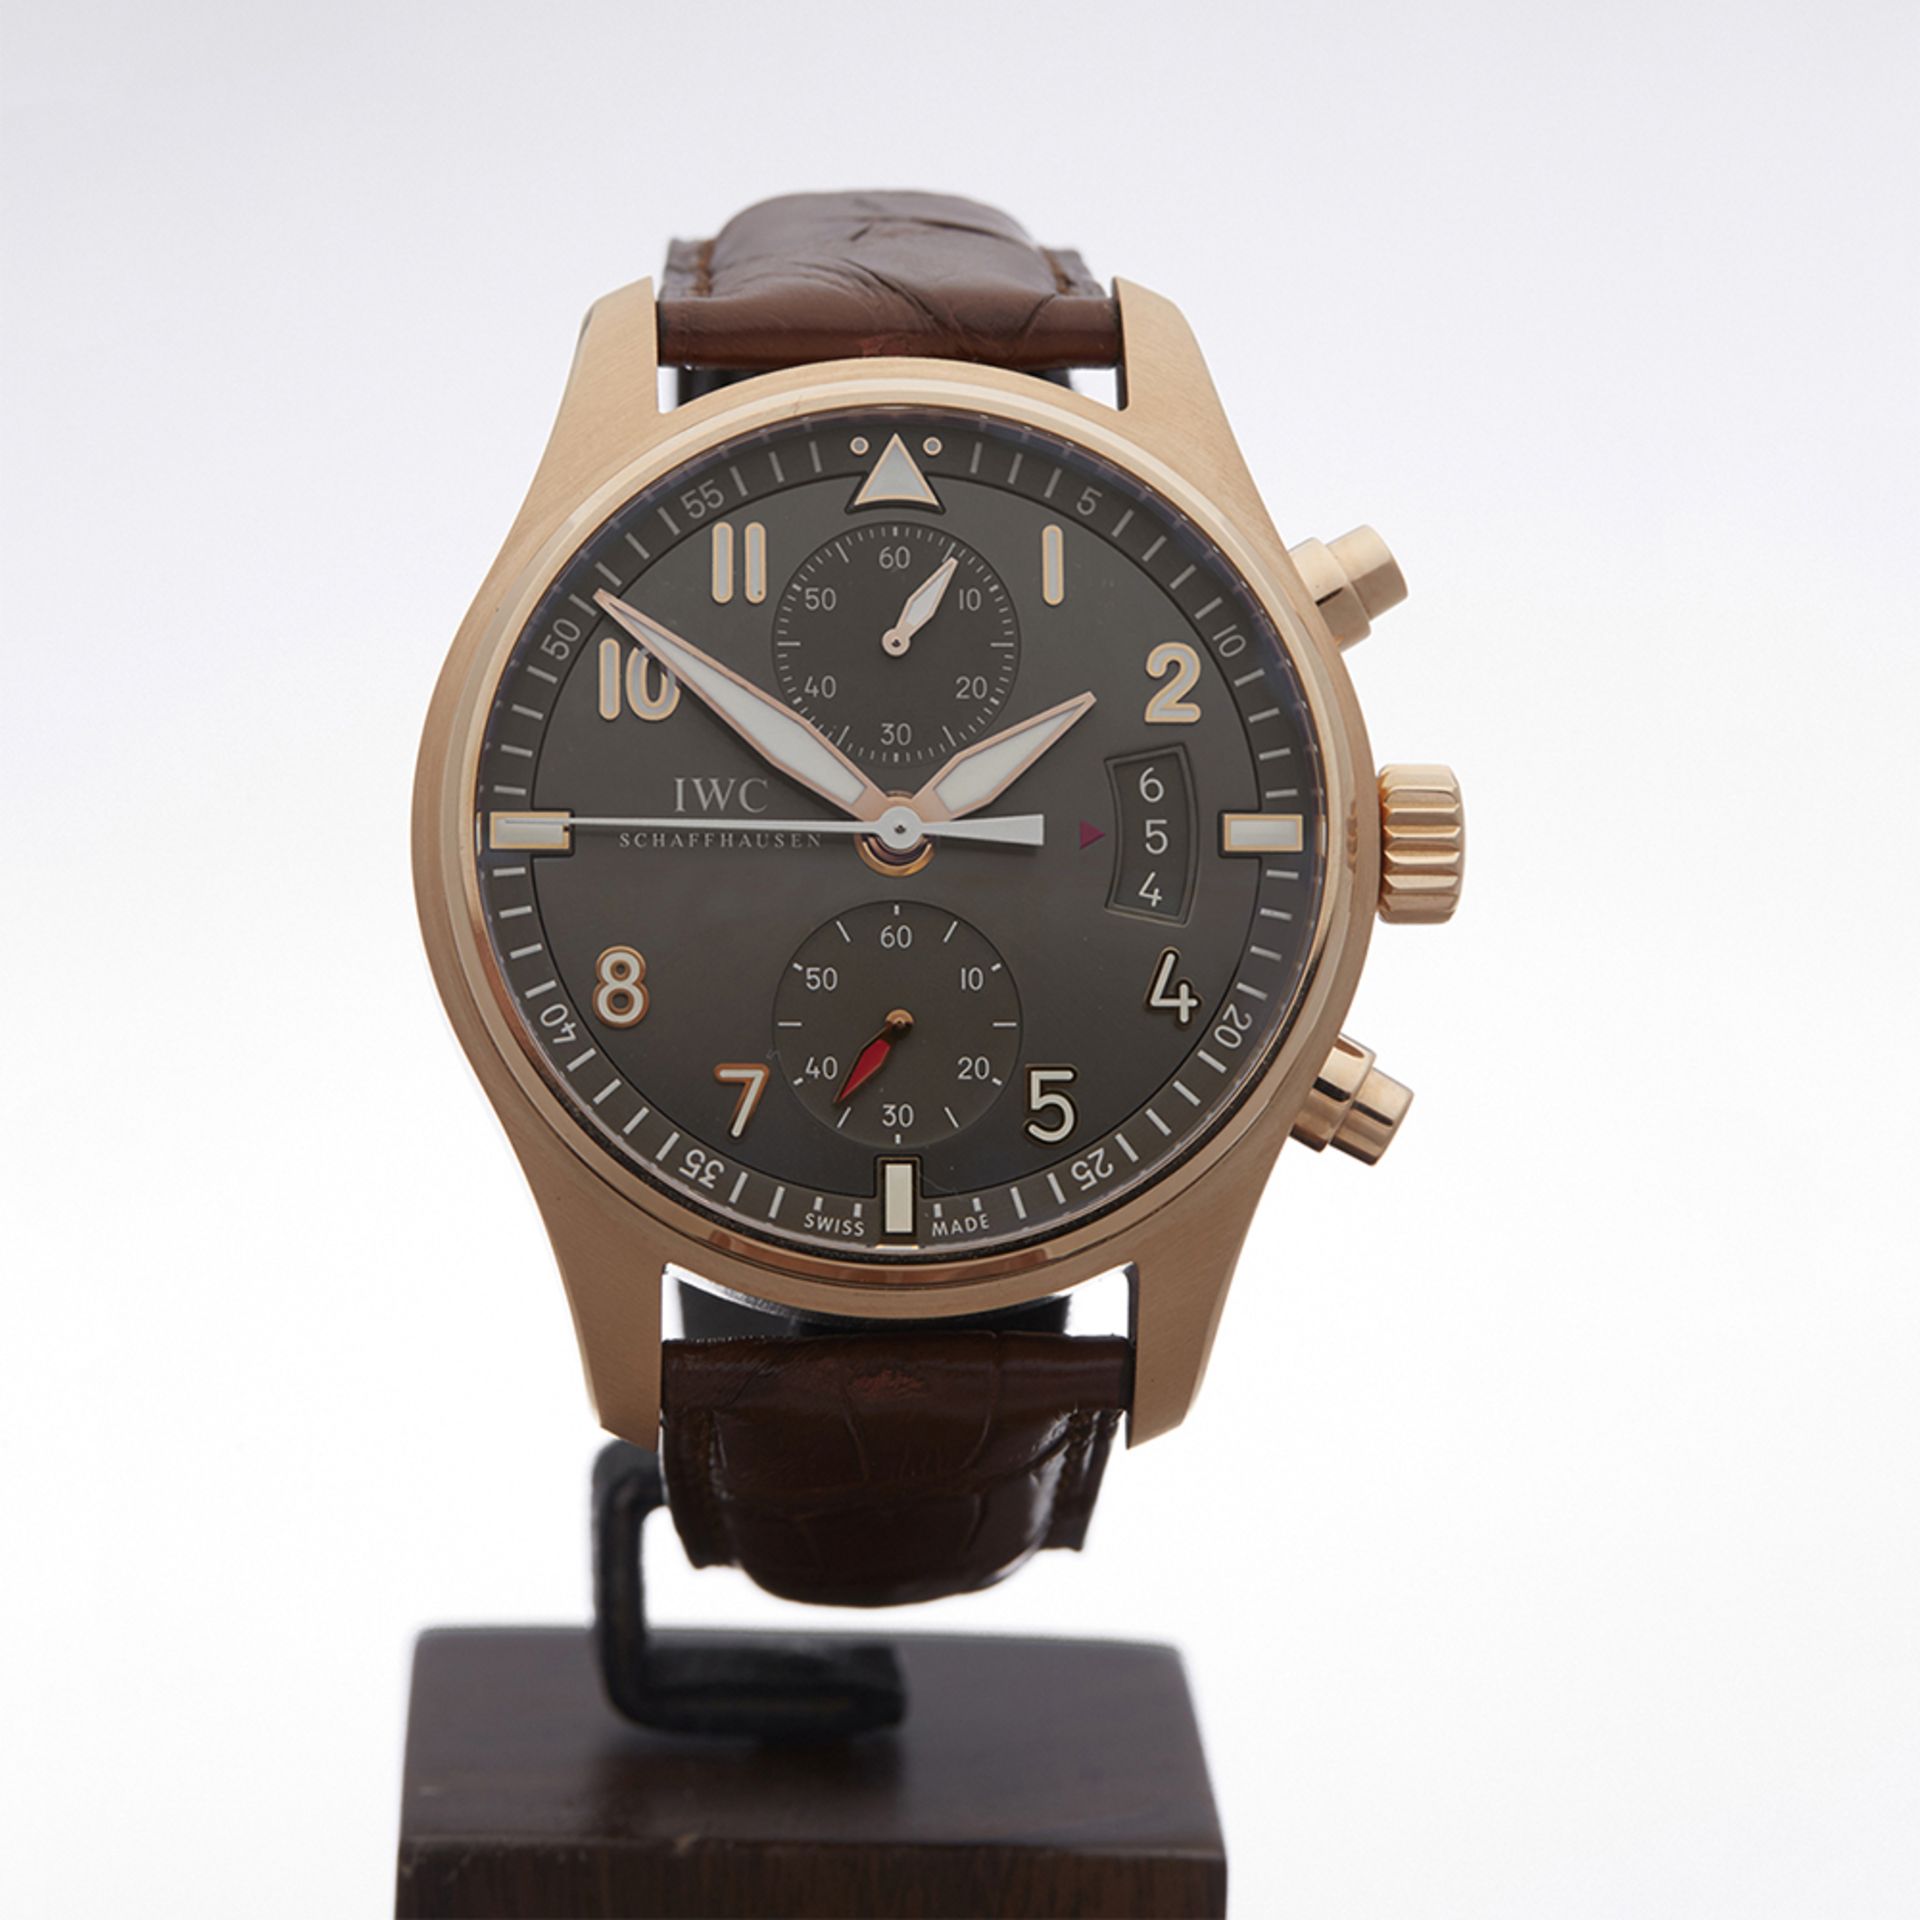 IWC, Pilot's Chronograph Spitfire 43mm 18k Rose Gold IW387803 - Image 2 of 9